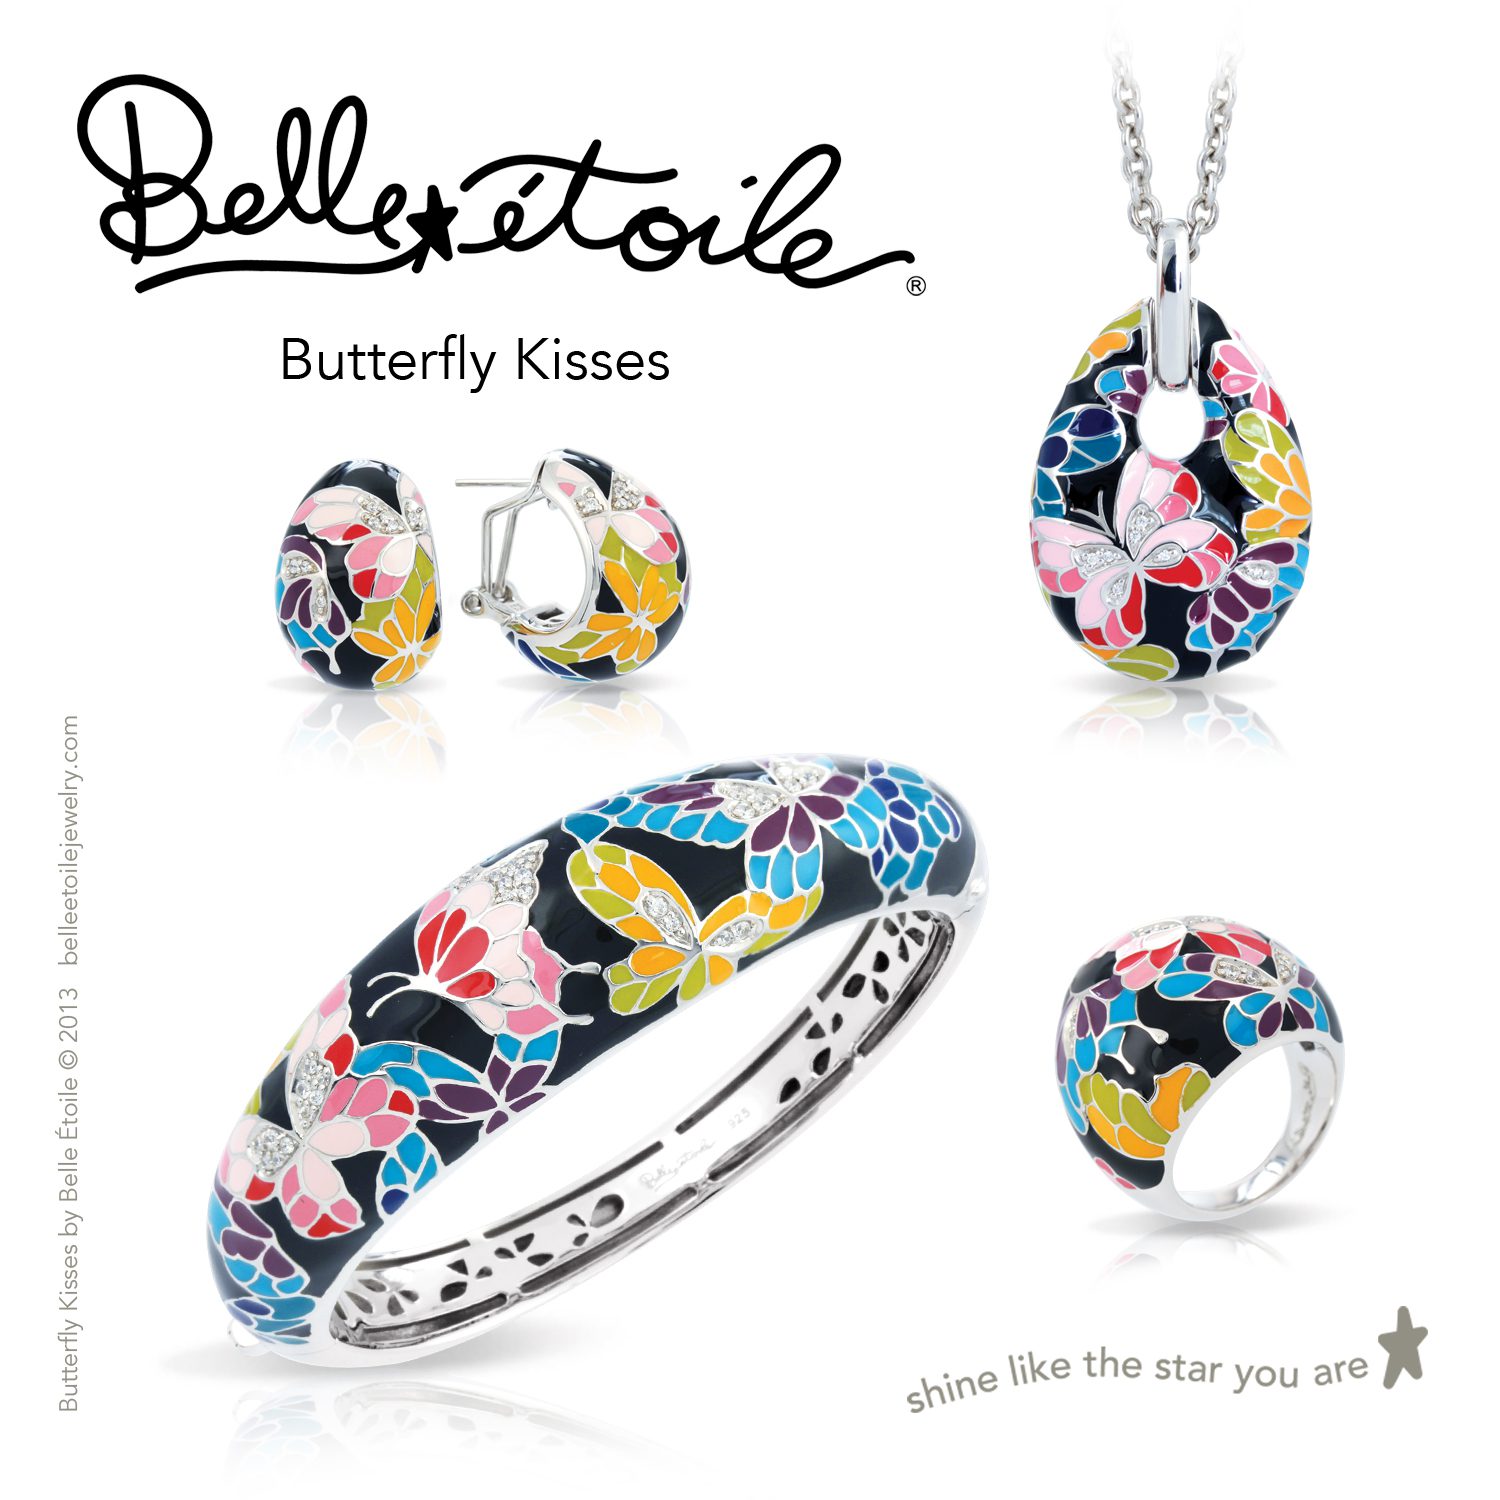 Belle Étoile Jewelry Butterfly Kisses collection